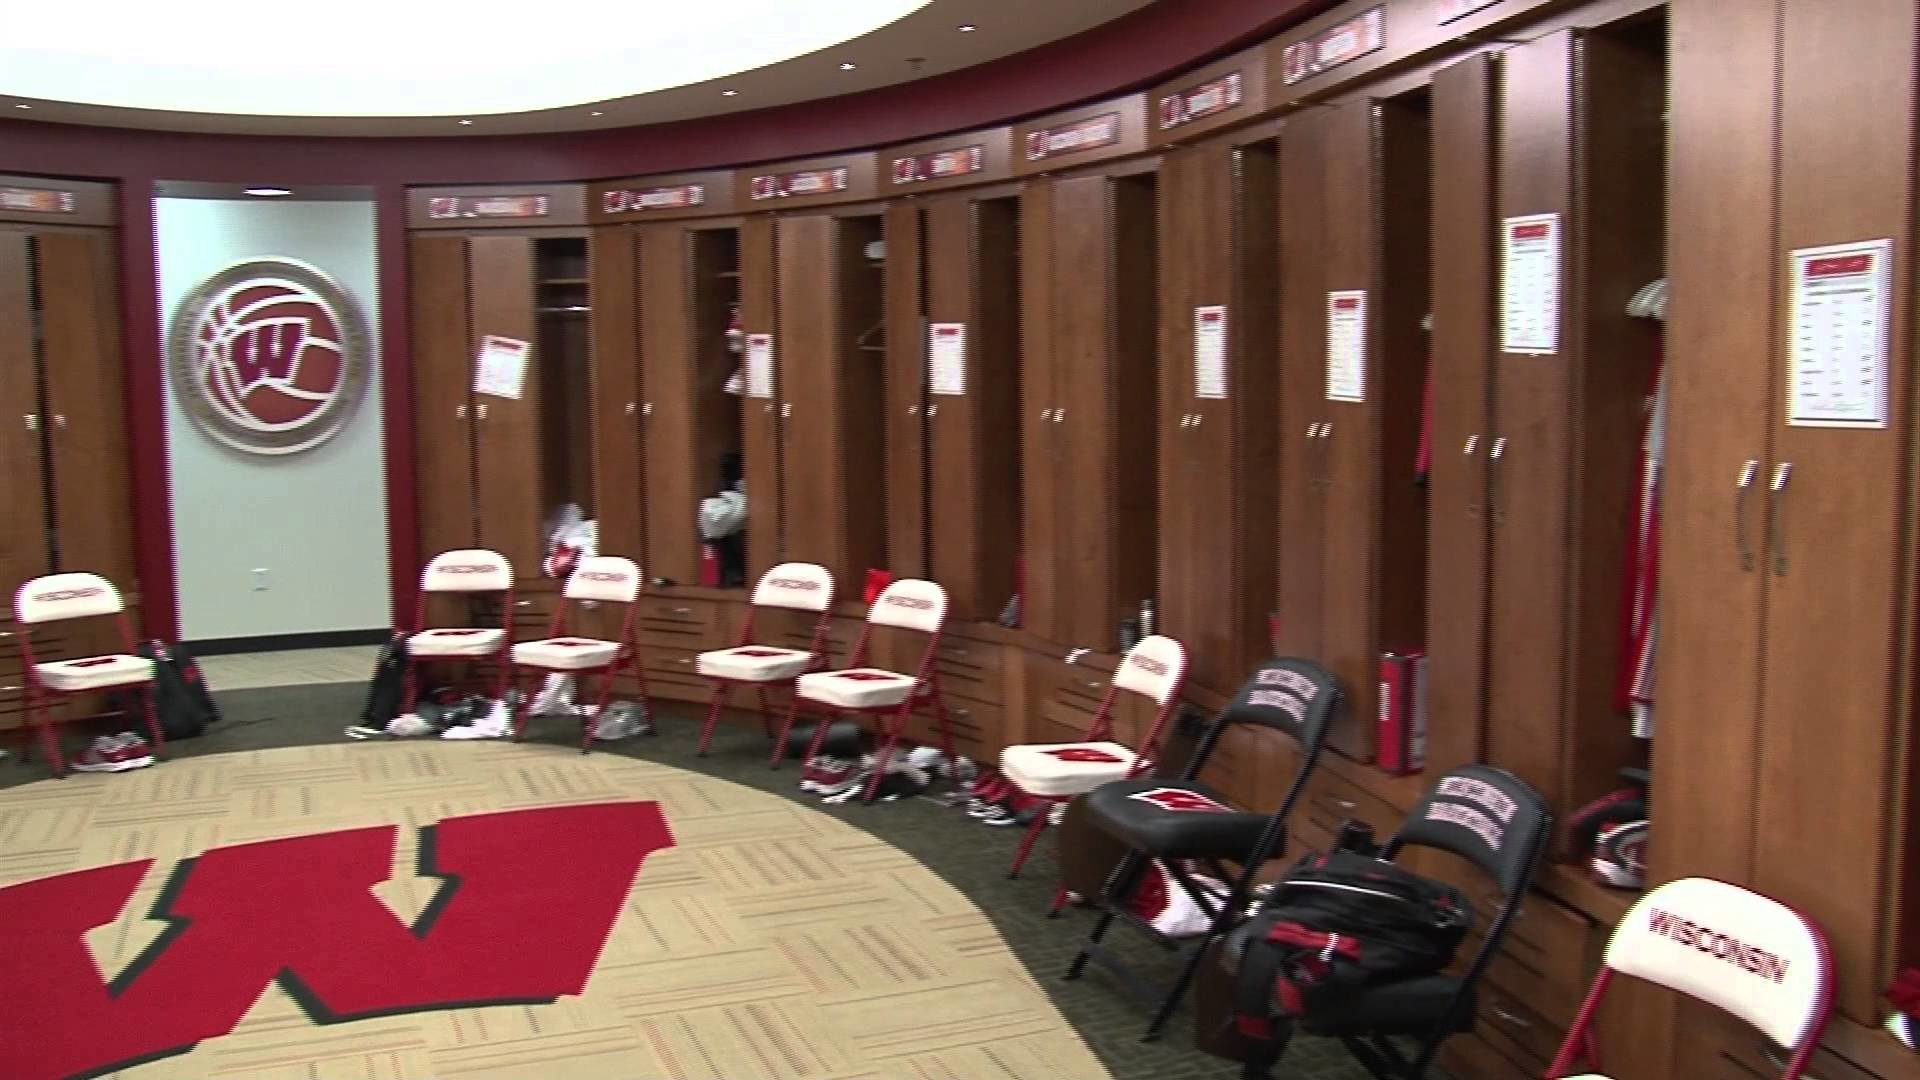 1920x1080 Ben Brust takes you on a tour of the Men's Basketball Locker Room - YouTube